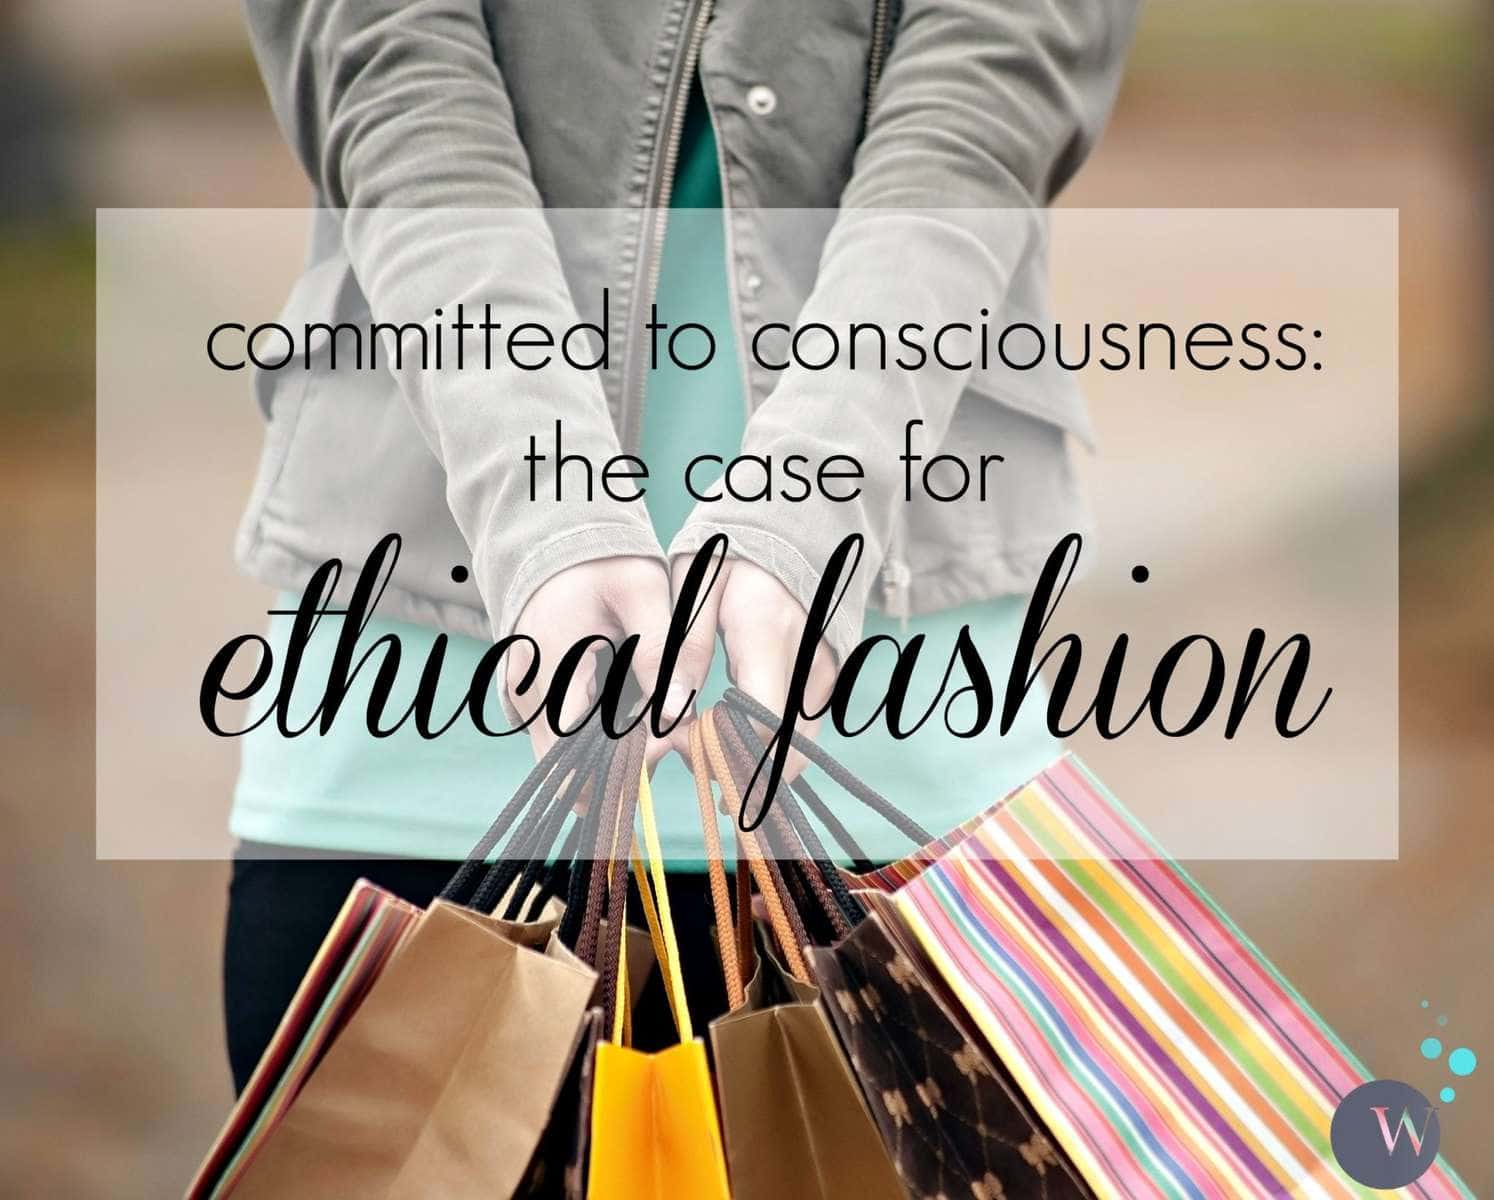 Committed to Consciousness – The Case for Ethical Fashion